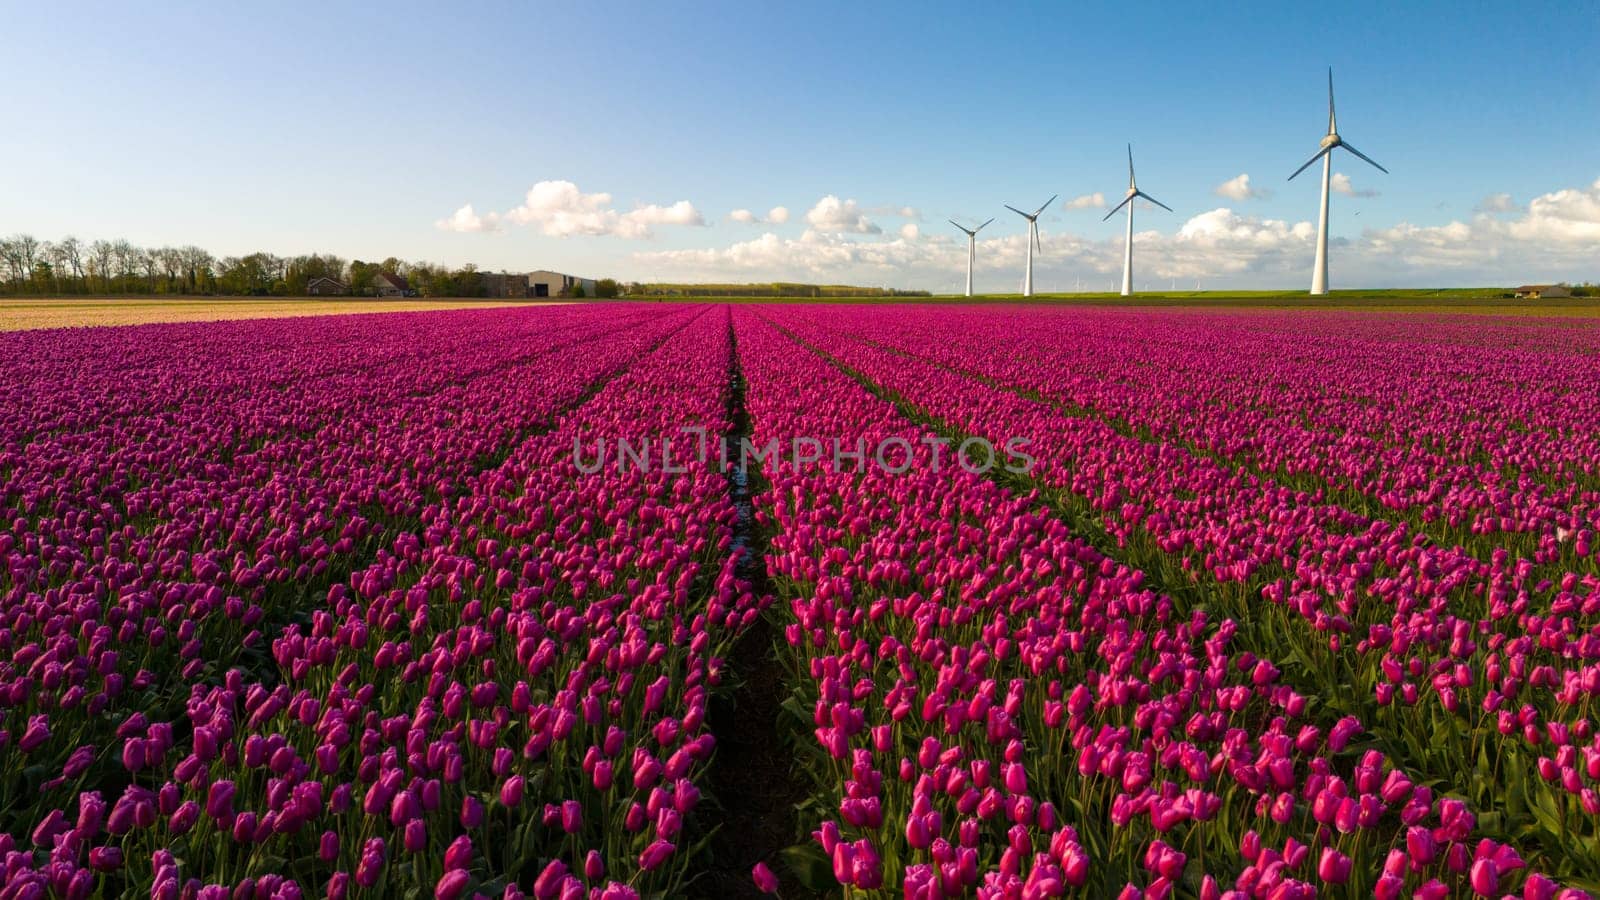 A vibrant field of colorful tulip flowers dances gracefully in the wind, with majestic windmills standing tall in the background under a clear blue sky. in the Noordoostpolder Netherlands